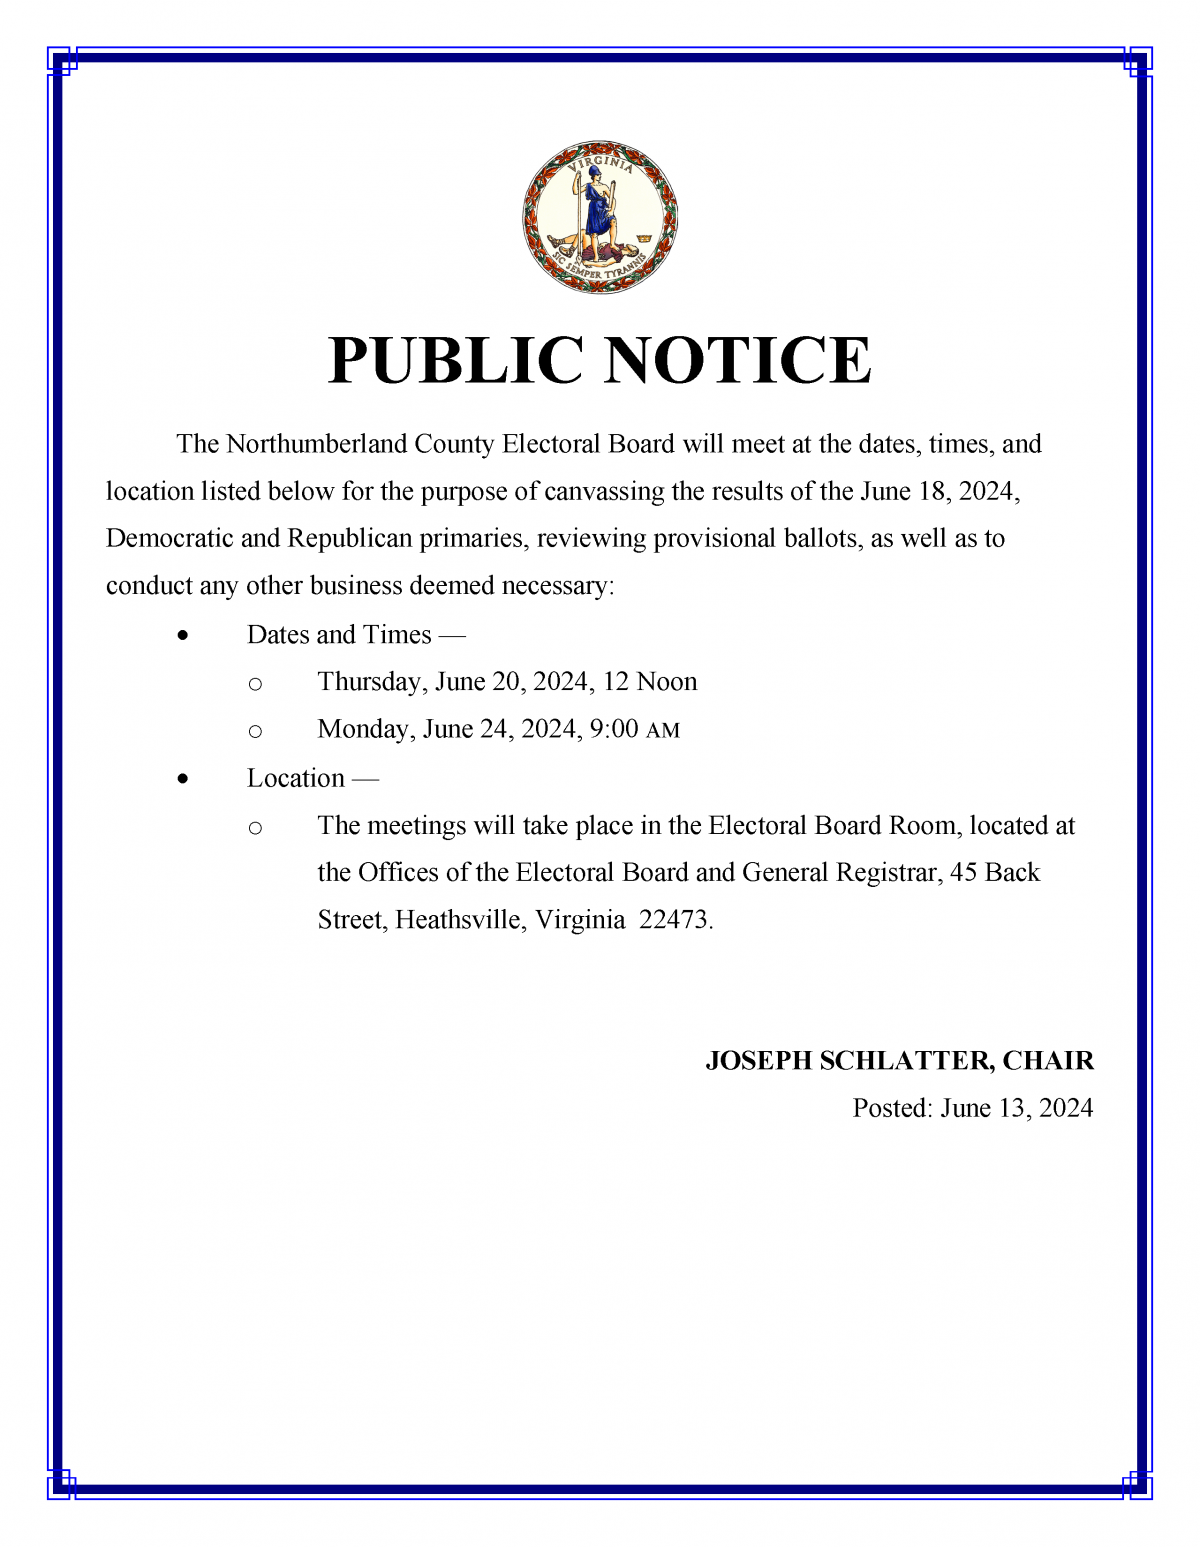 Public Notice of Canvass